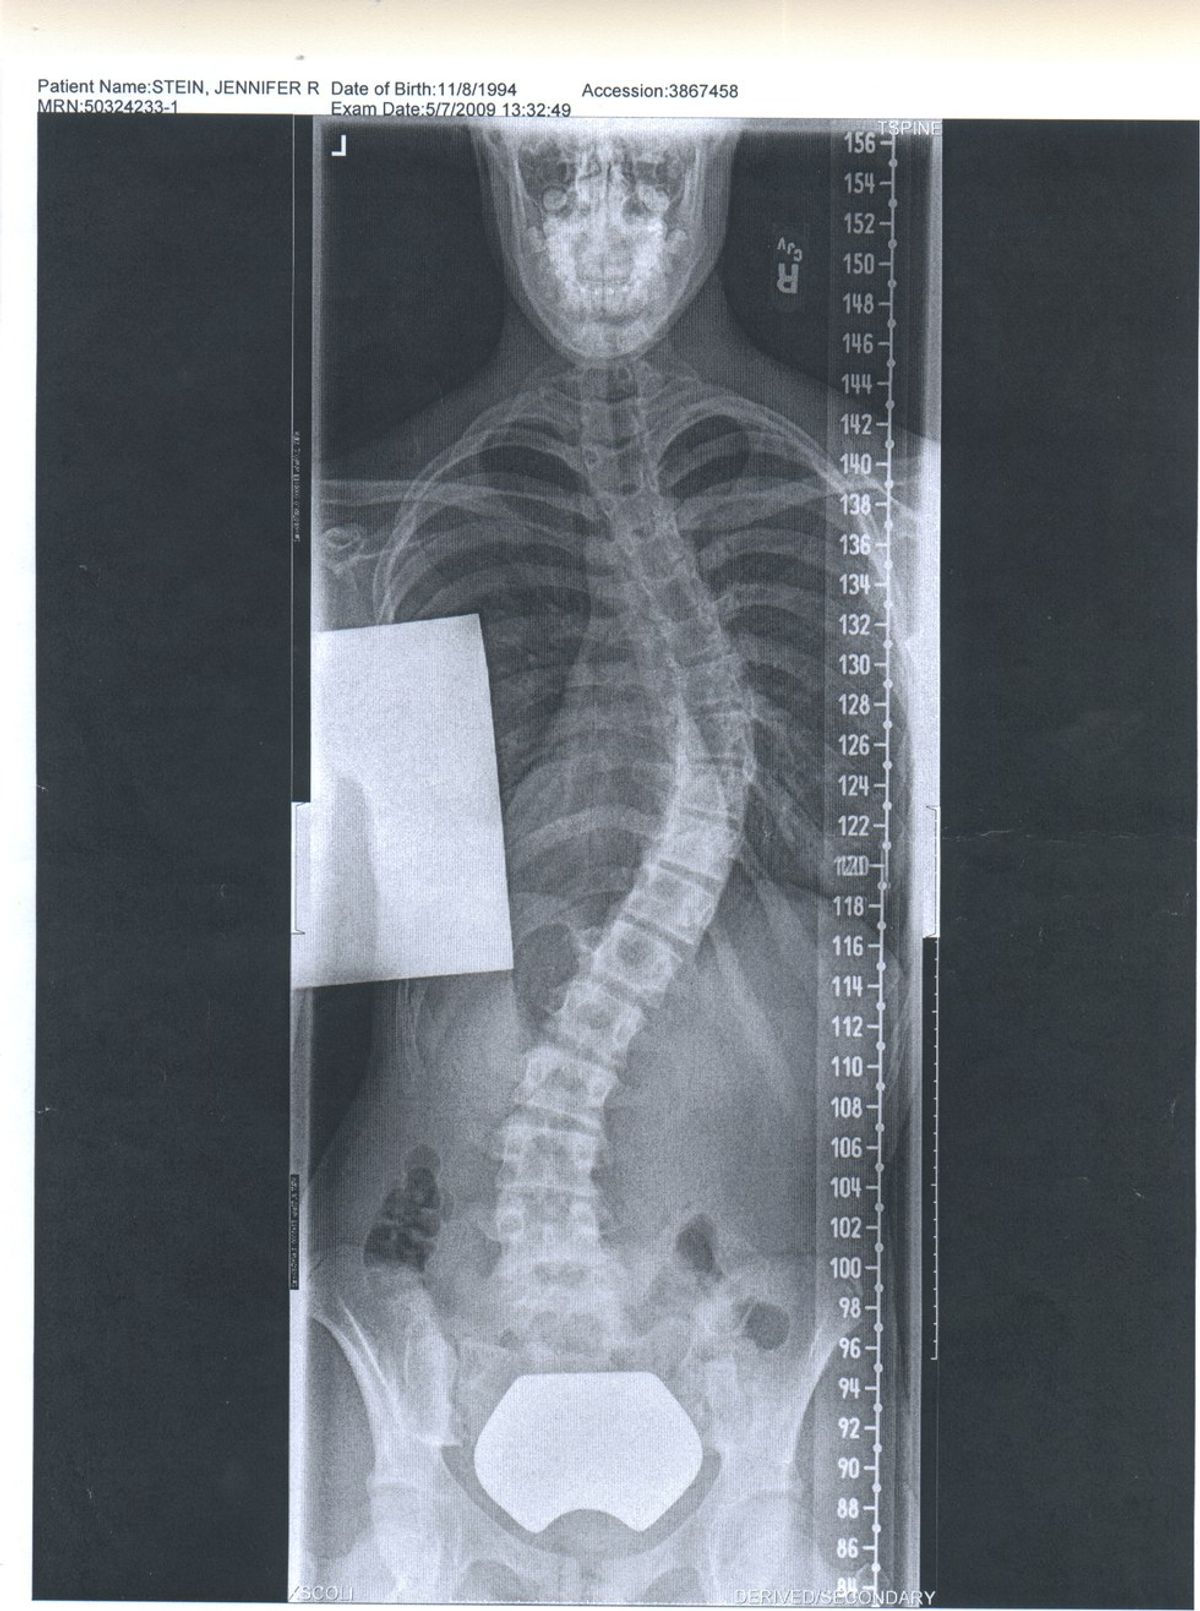 Let's Get this Straight: Scoliosis Surgery